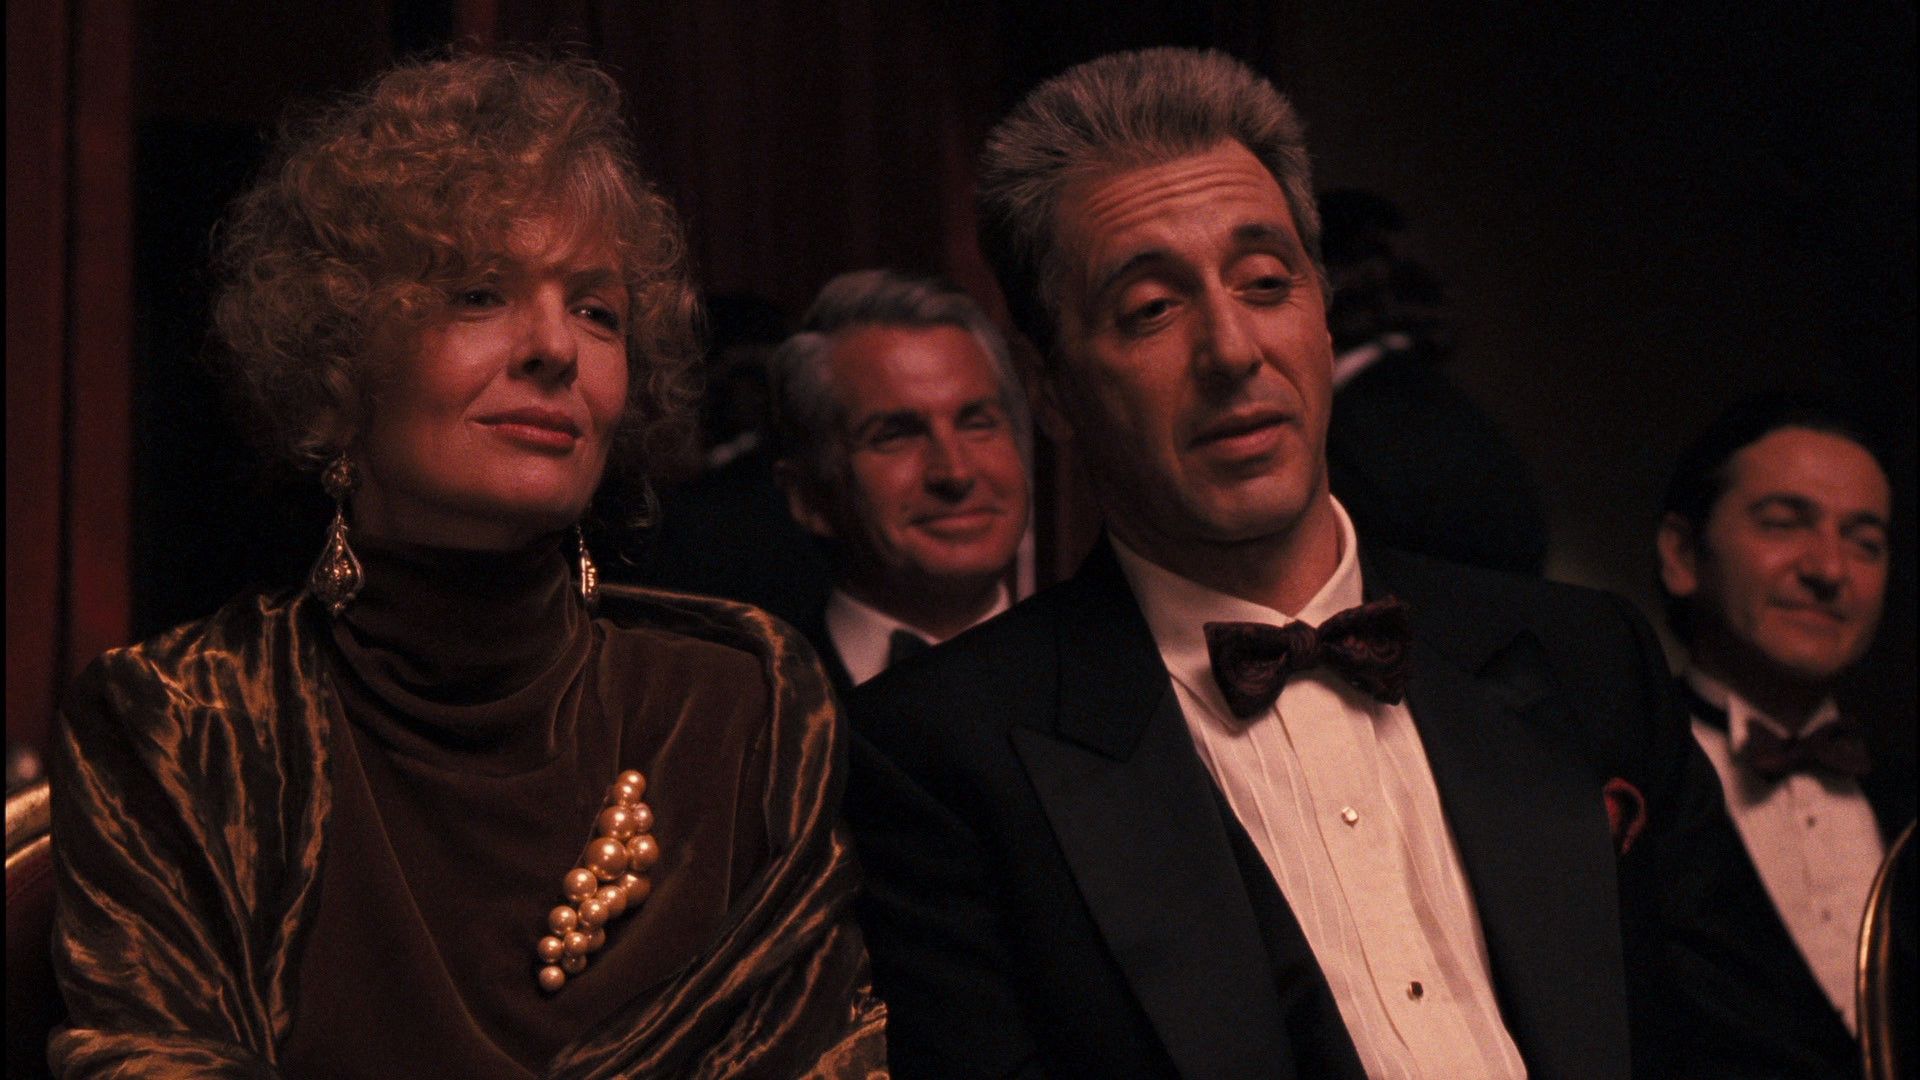 Michael and Kay in The Godfather Part III